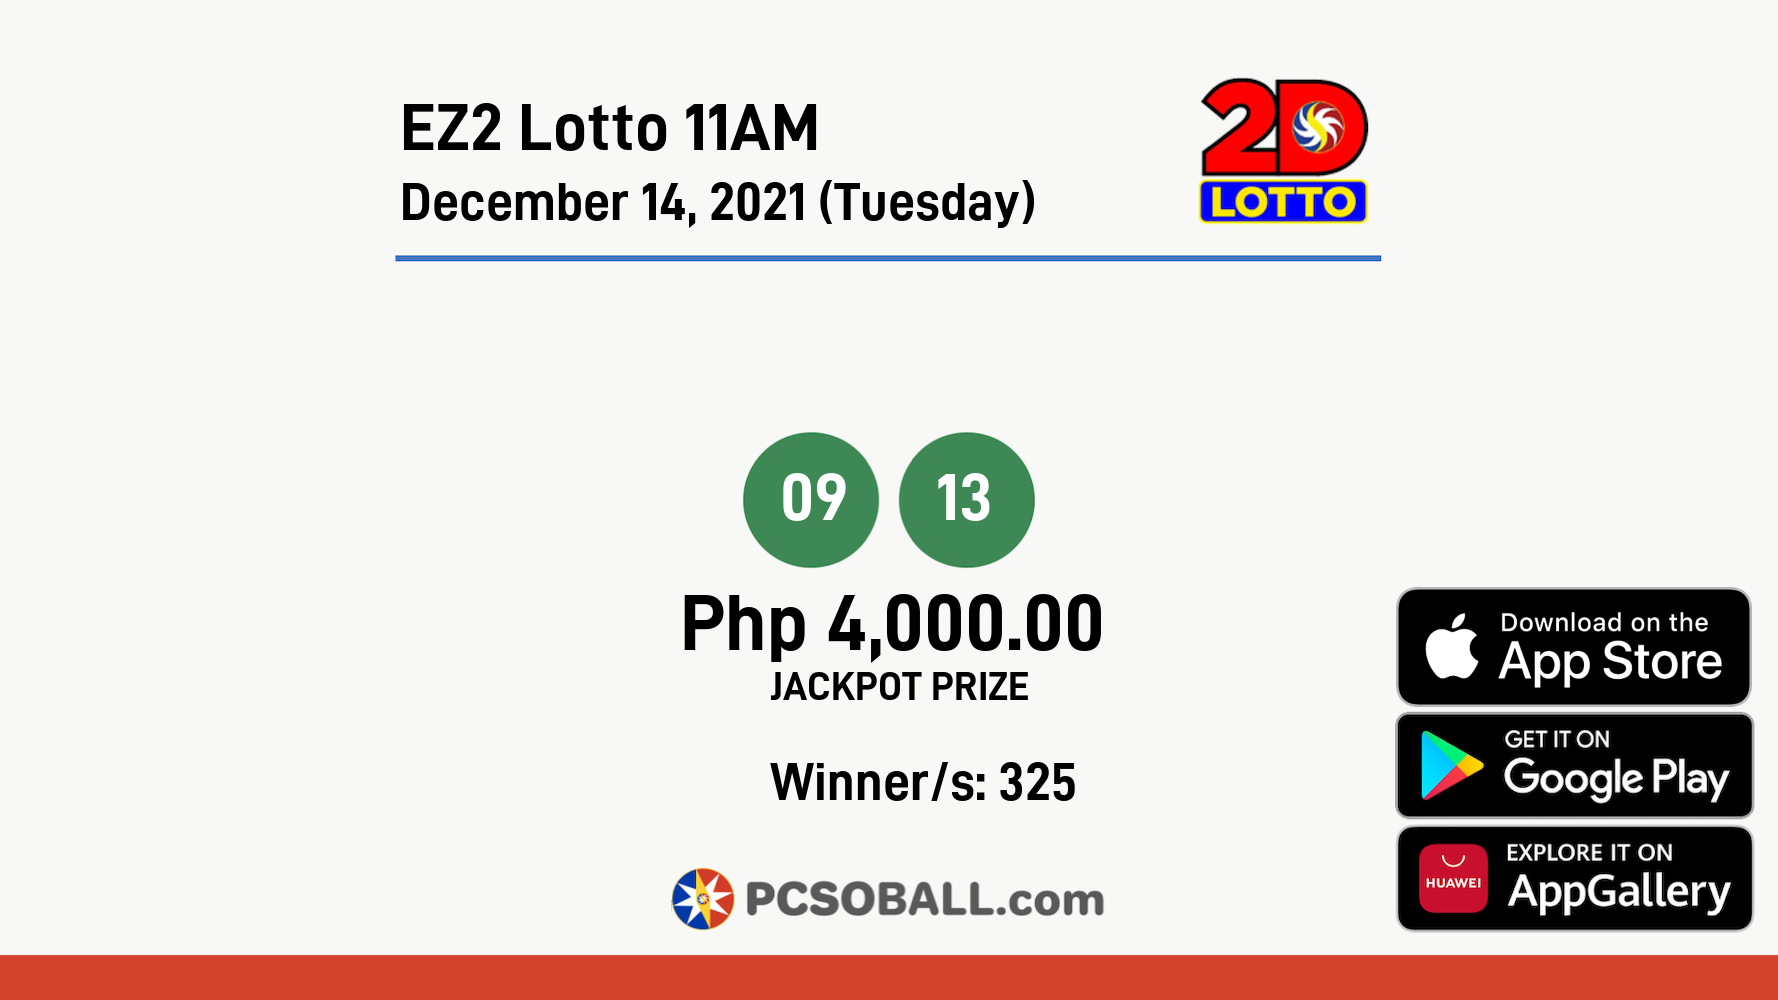 EZ2 Lotto 11AM December 14, 2021 (Tuesday) Result